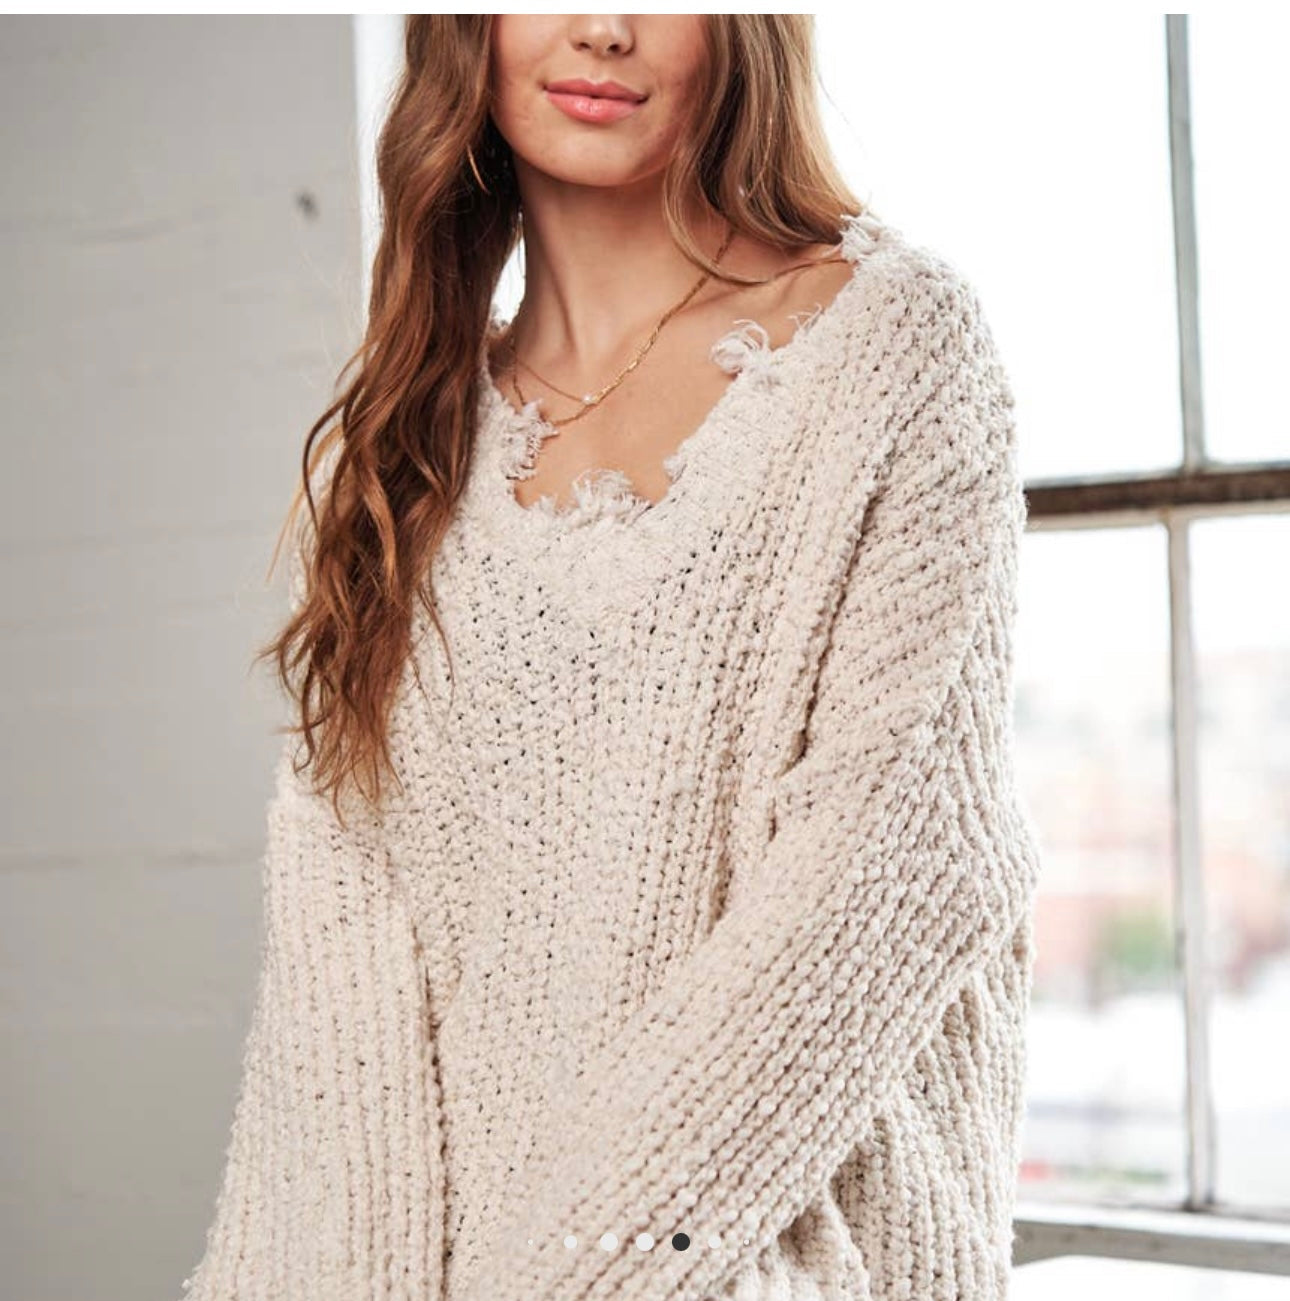 Callie Frayed Sweater in Ivory